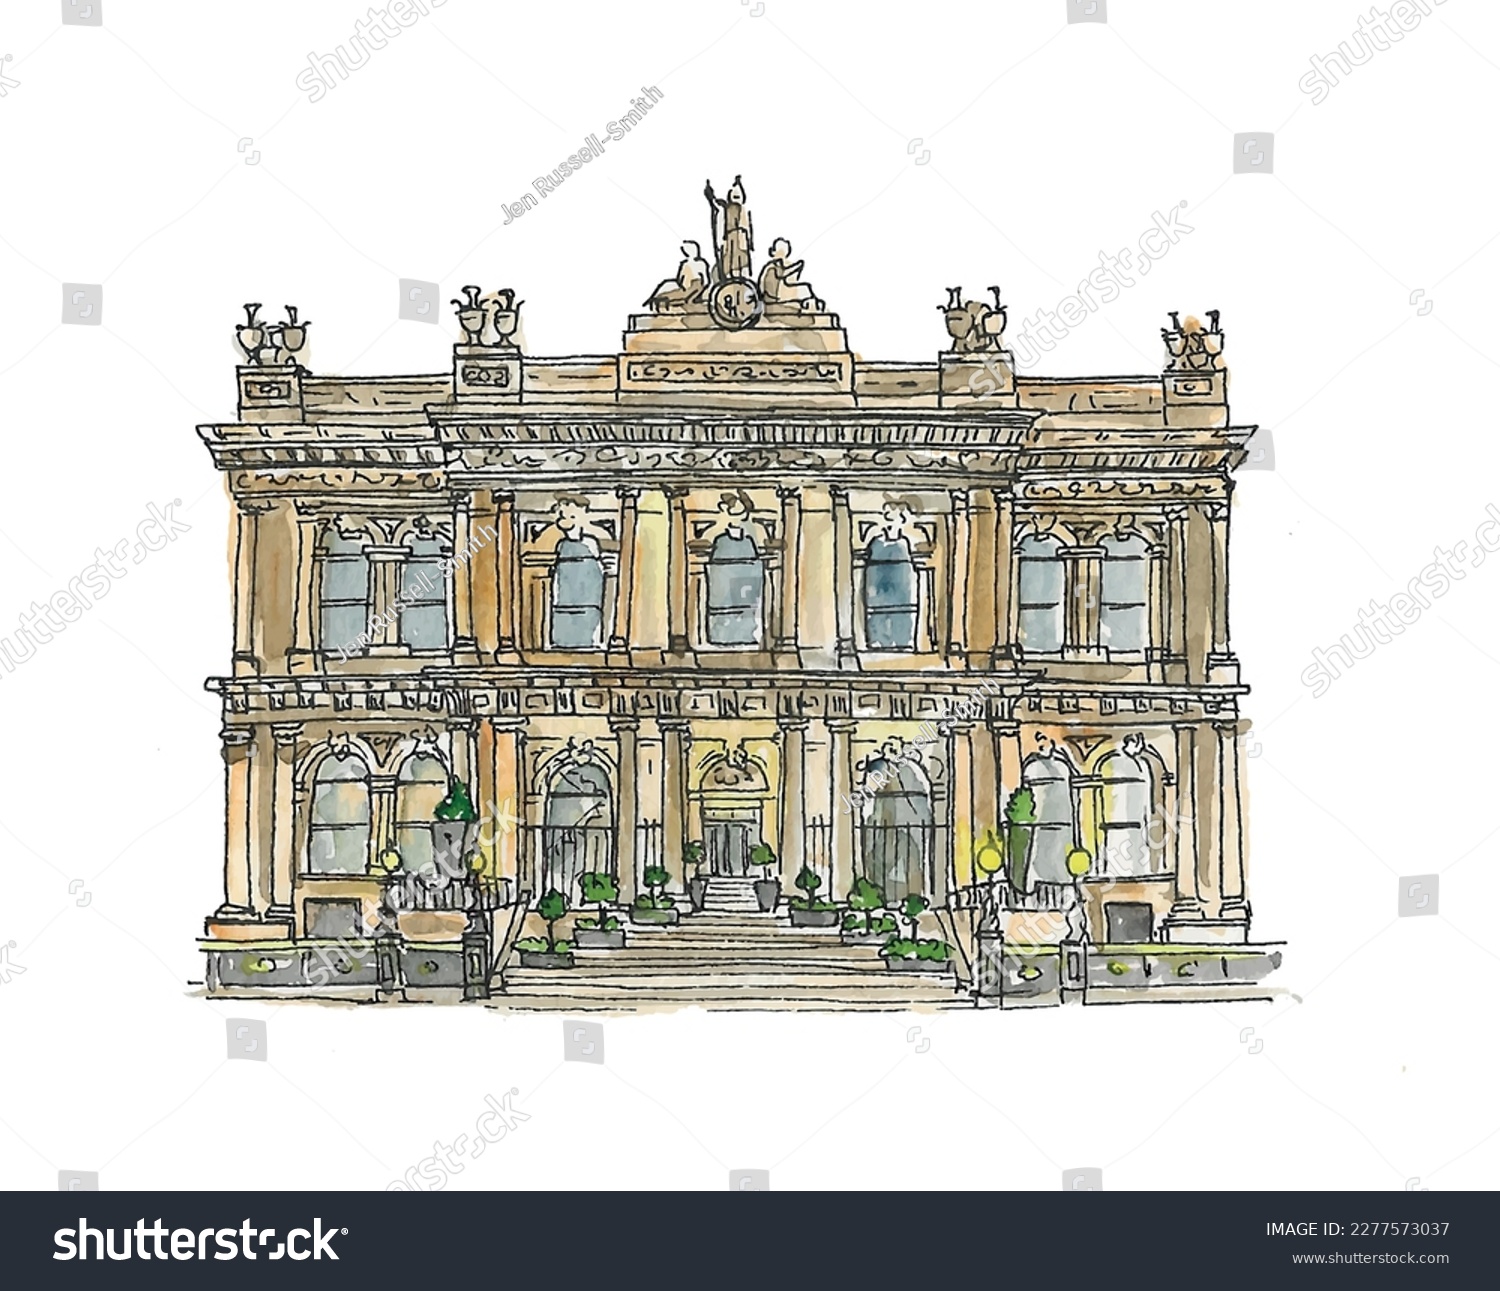 SVG of Luxury hotel, Victorian building, Wedding Venue, steps, statues. Watercolor sketch illustration. Isolated vector. svg